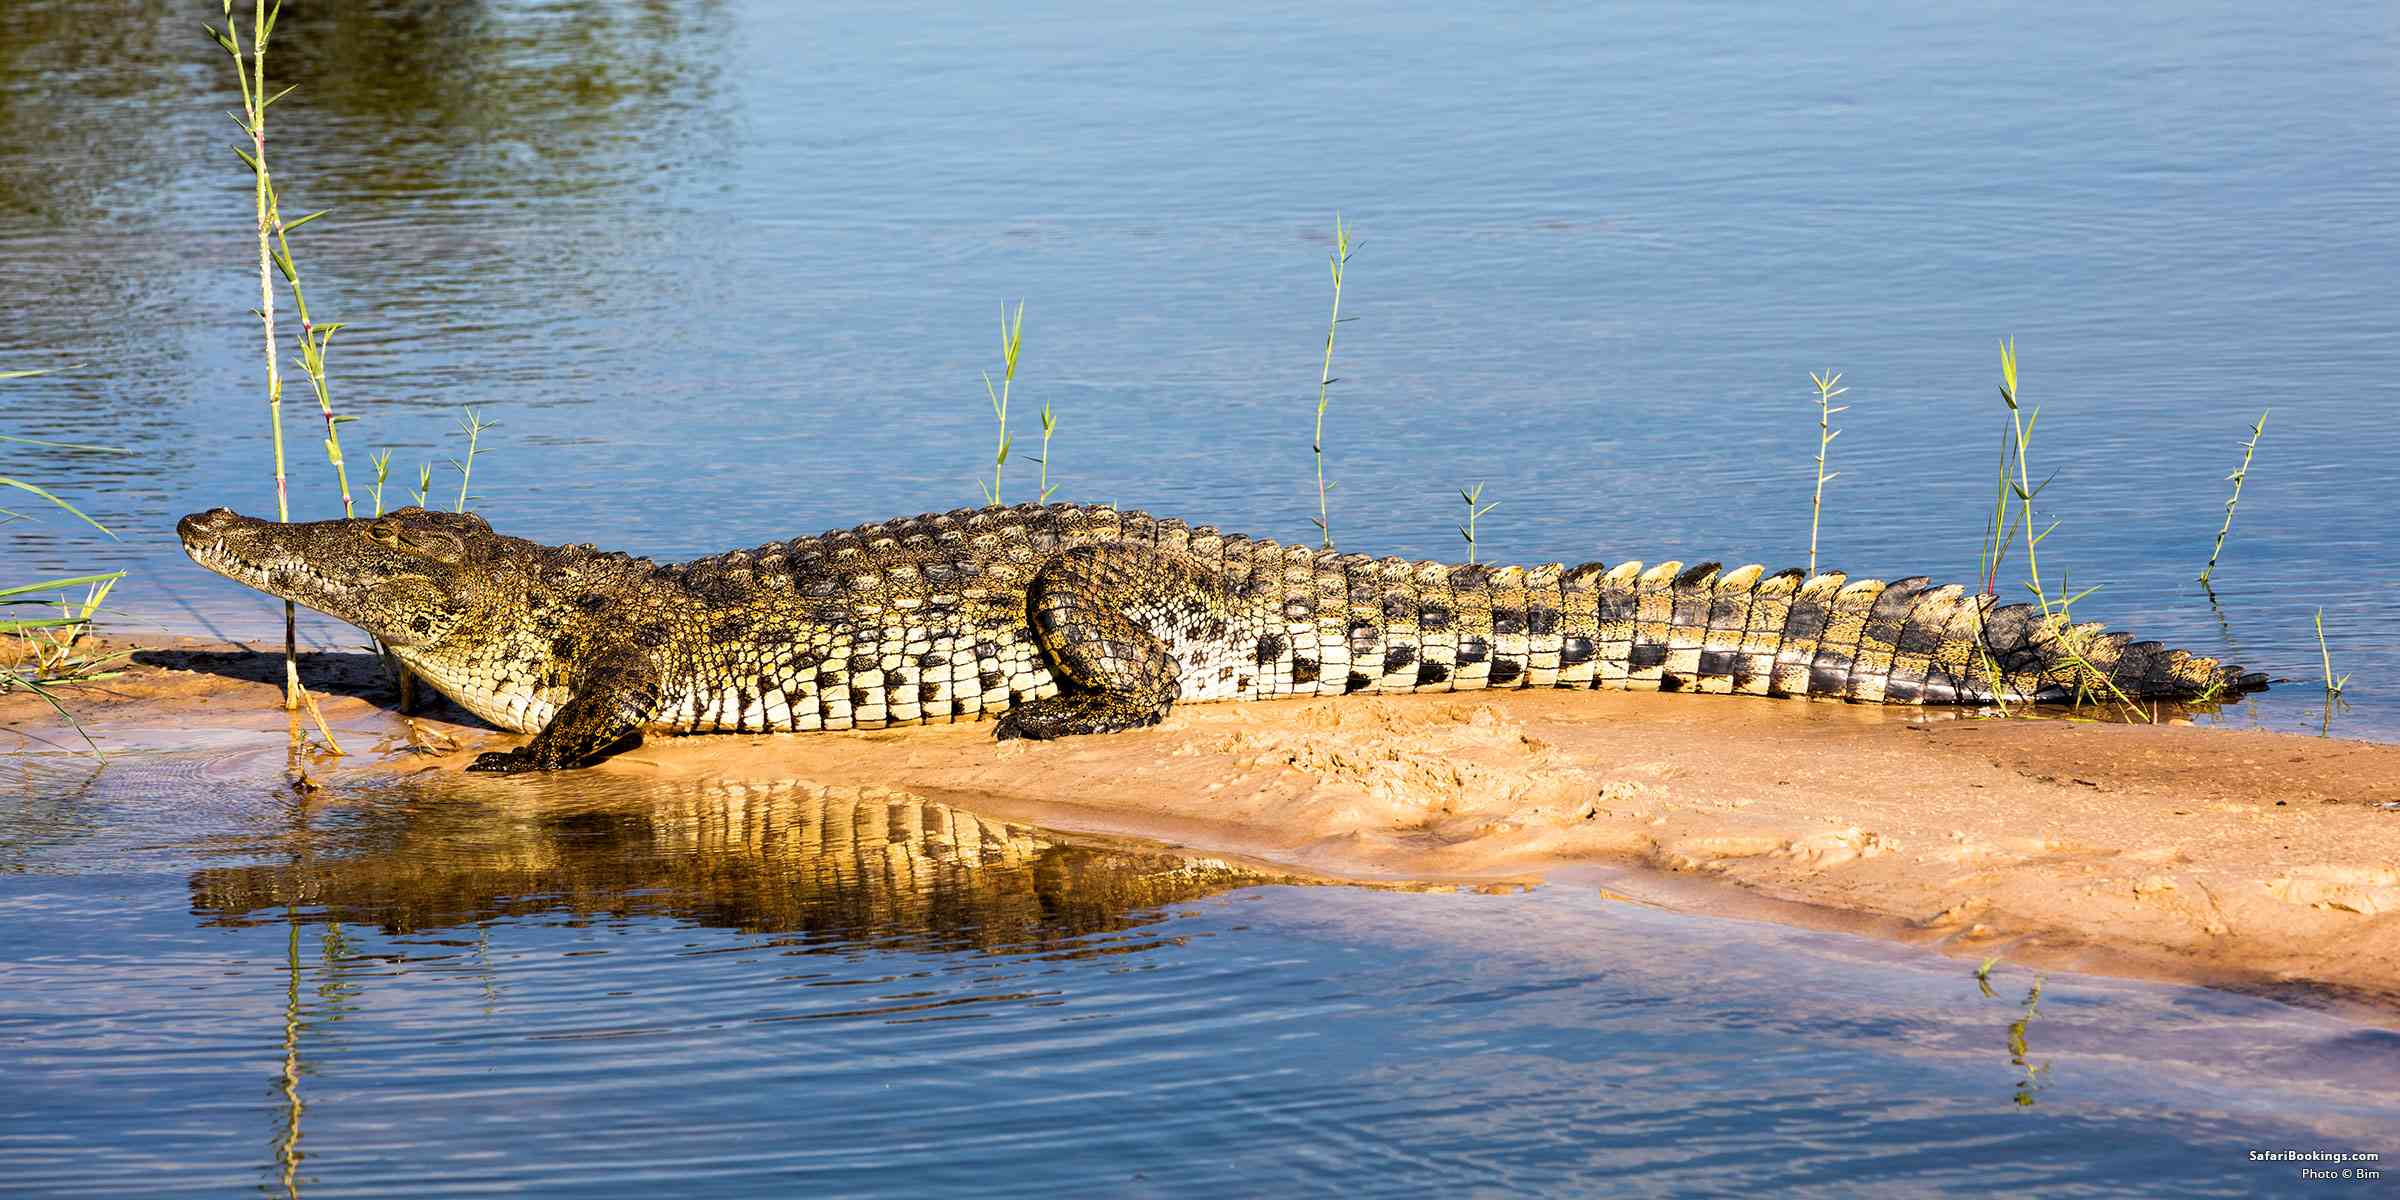 5 Fascinating Facts About the Nile Crocodile